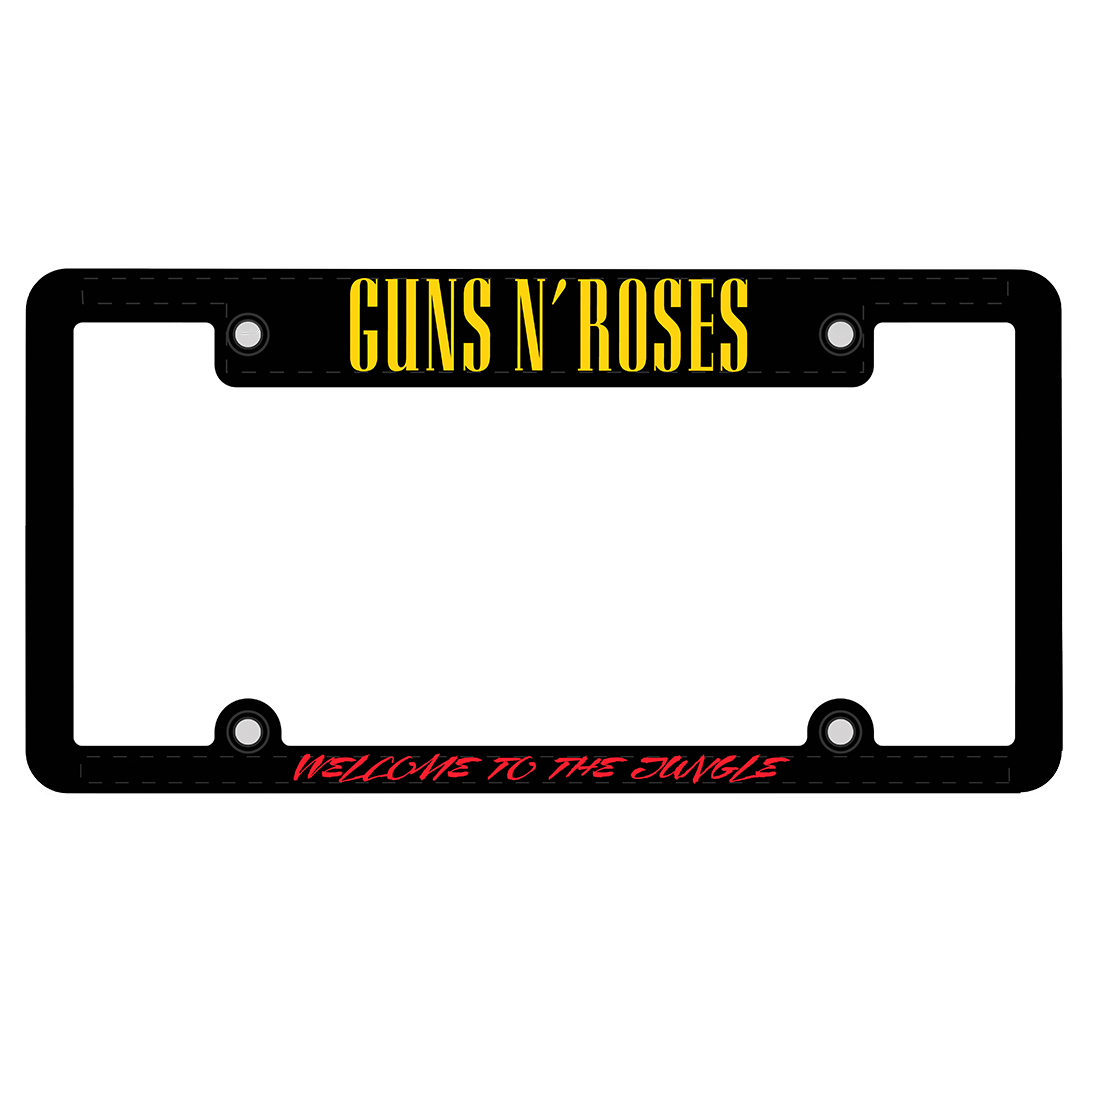 Guns N' Roses - Welcome to The Jungle license plate frame